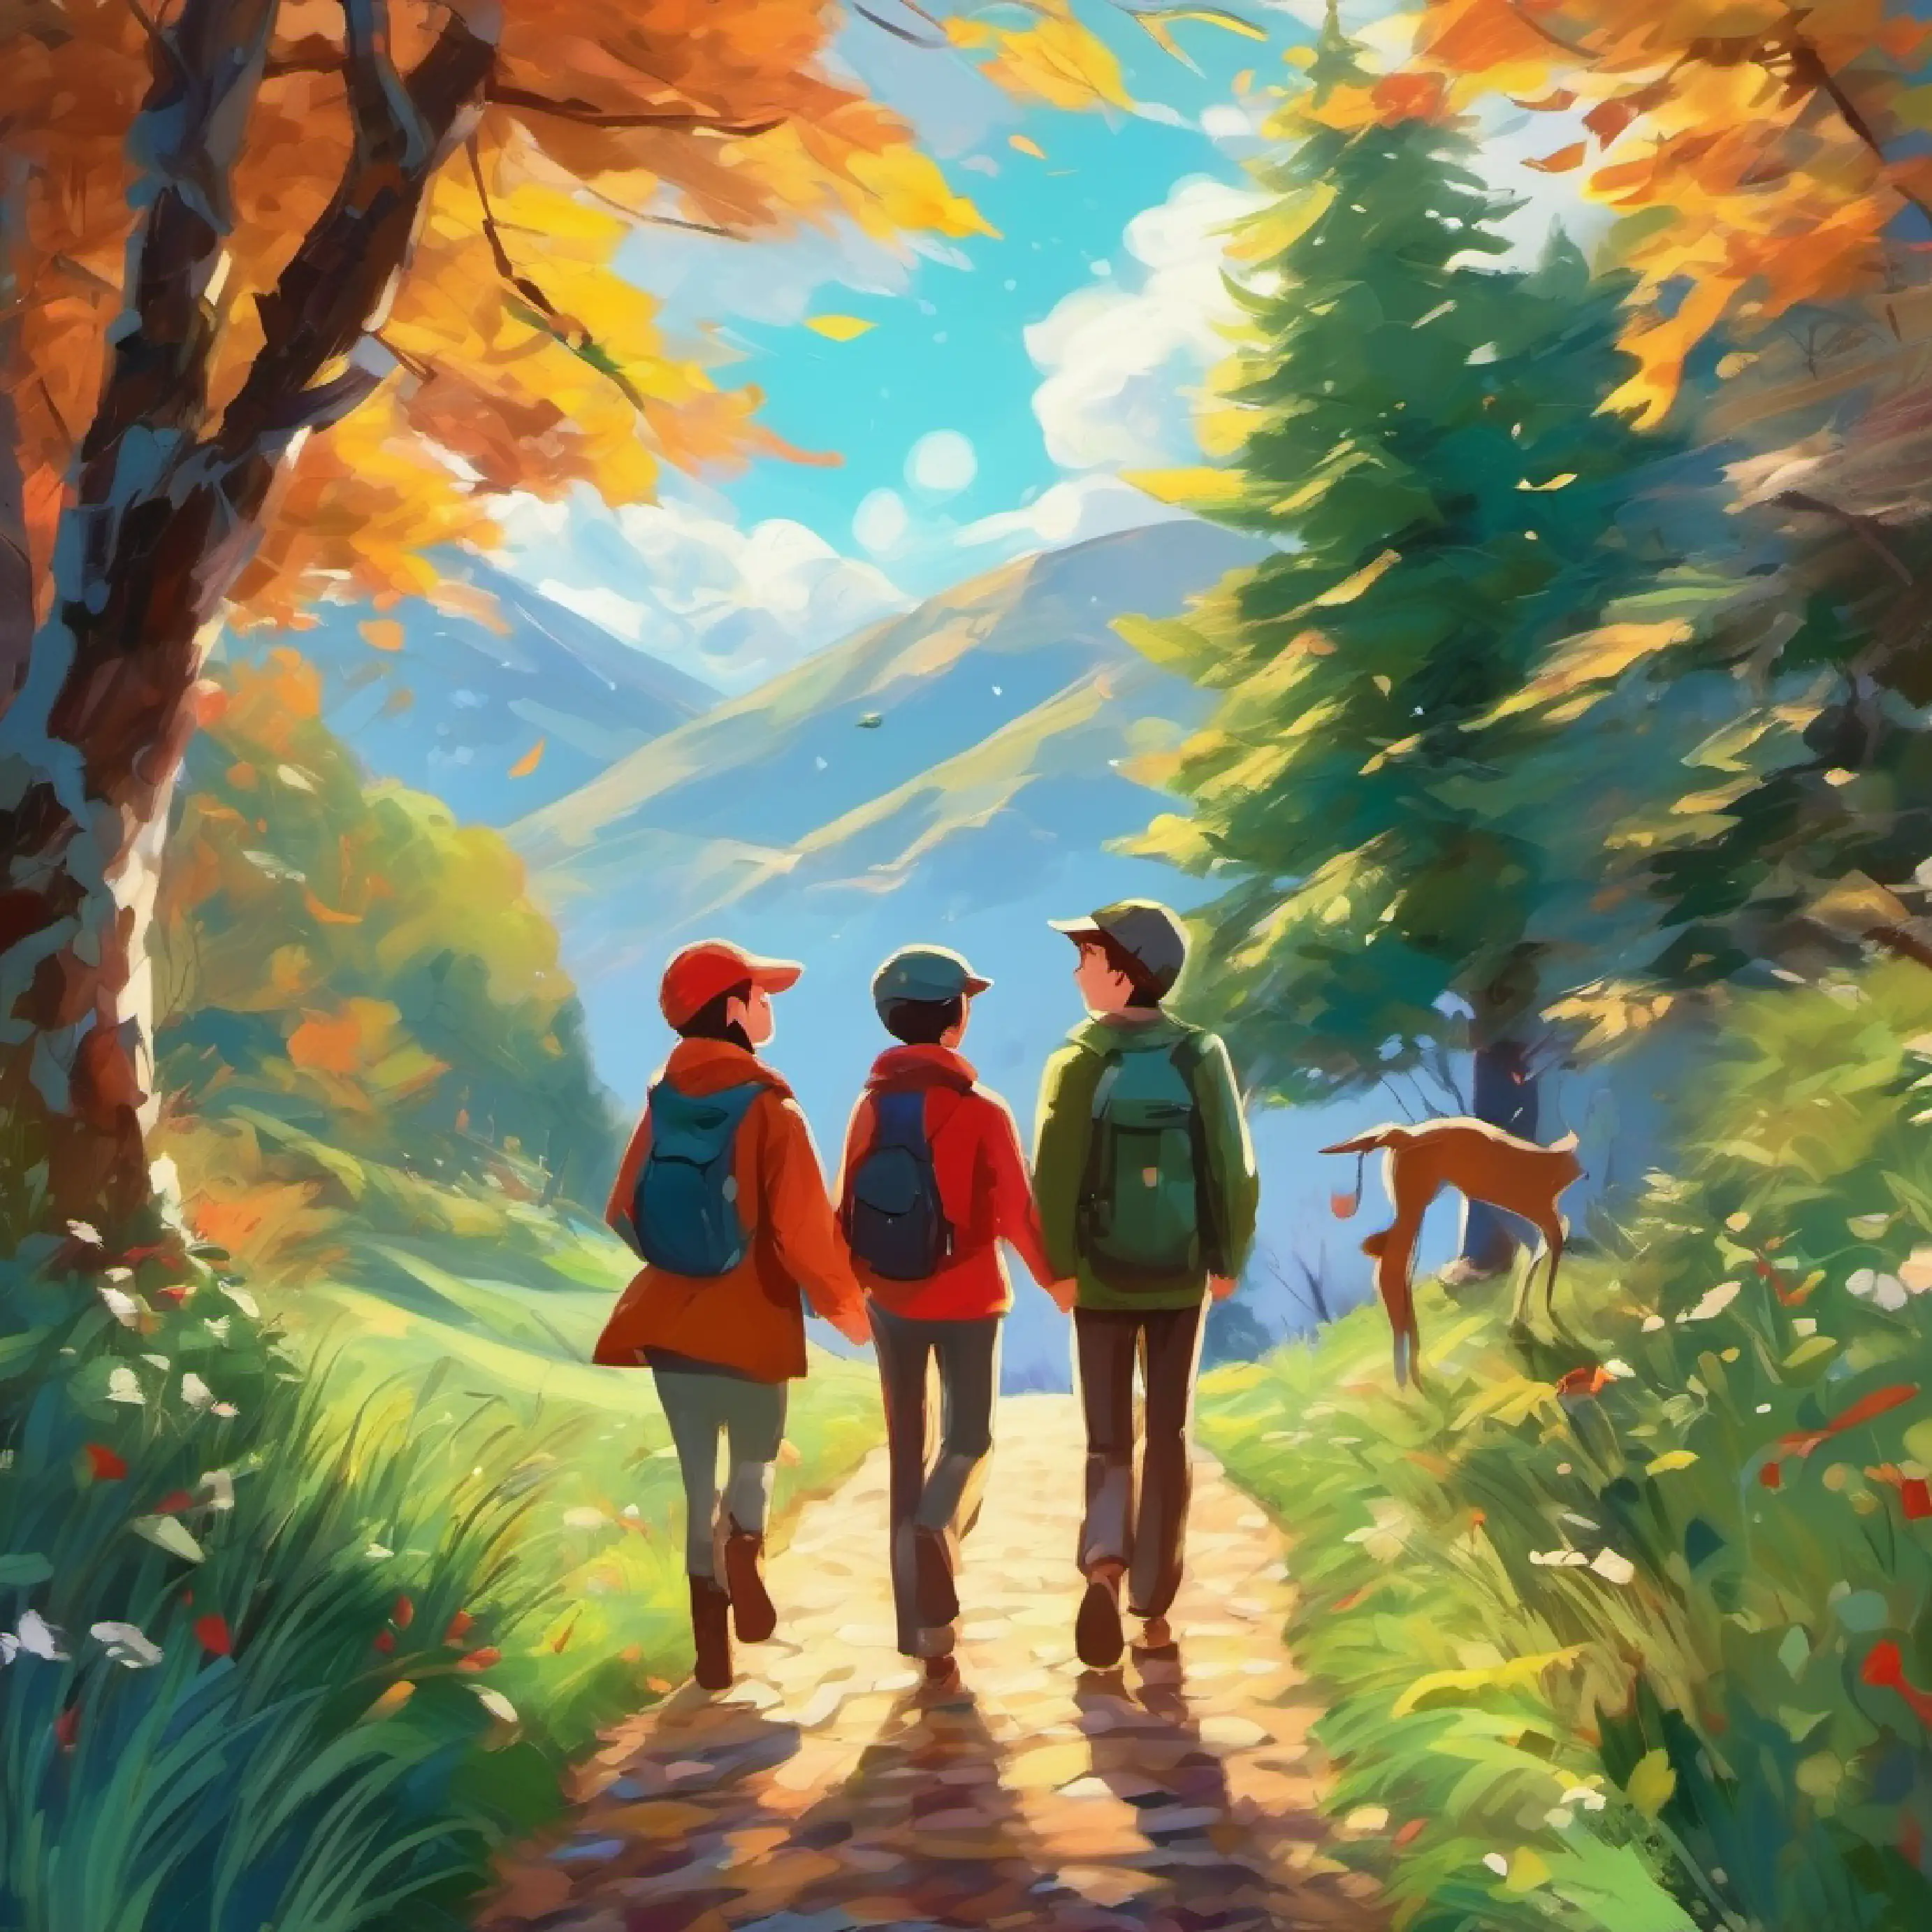 Walking together, the group shares stories amid the symphony of nature.